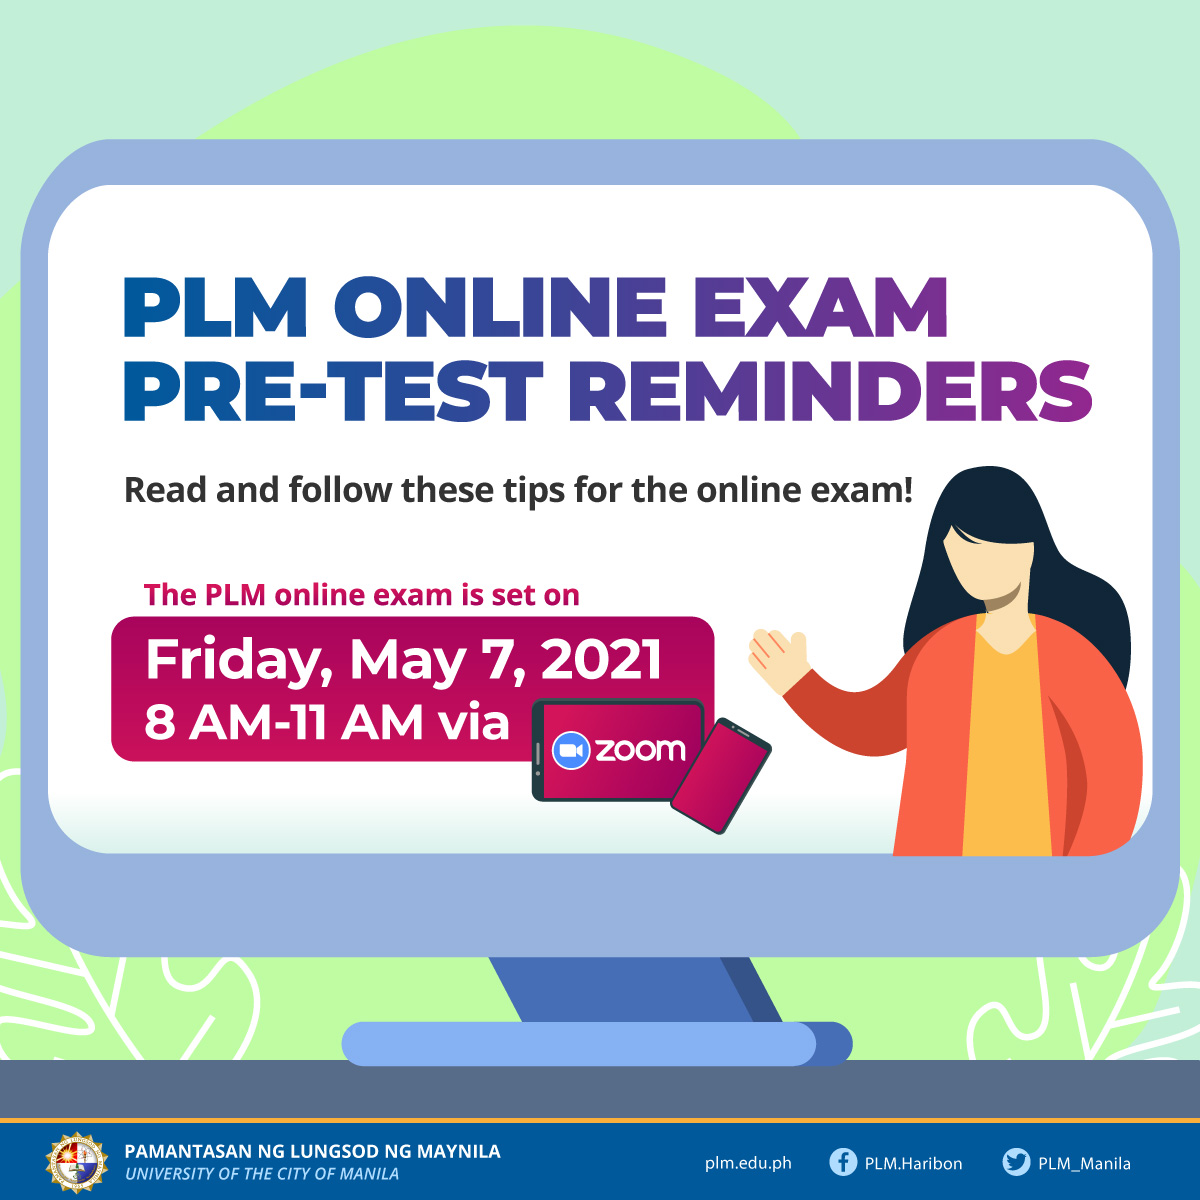 Instructions for PLM Online Exam takers for AY 2021-2022